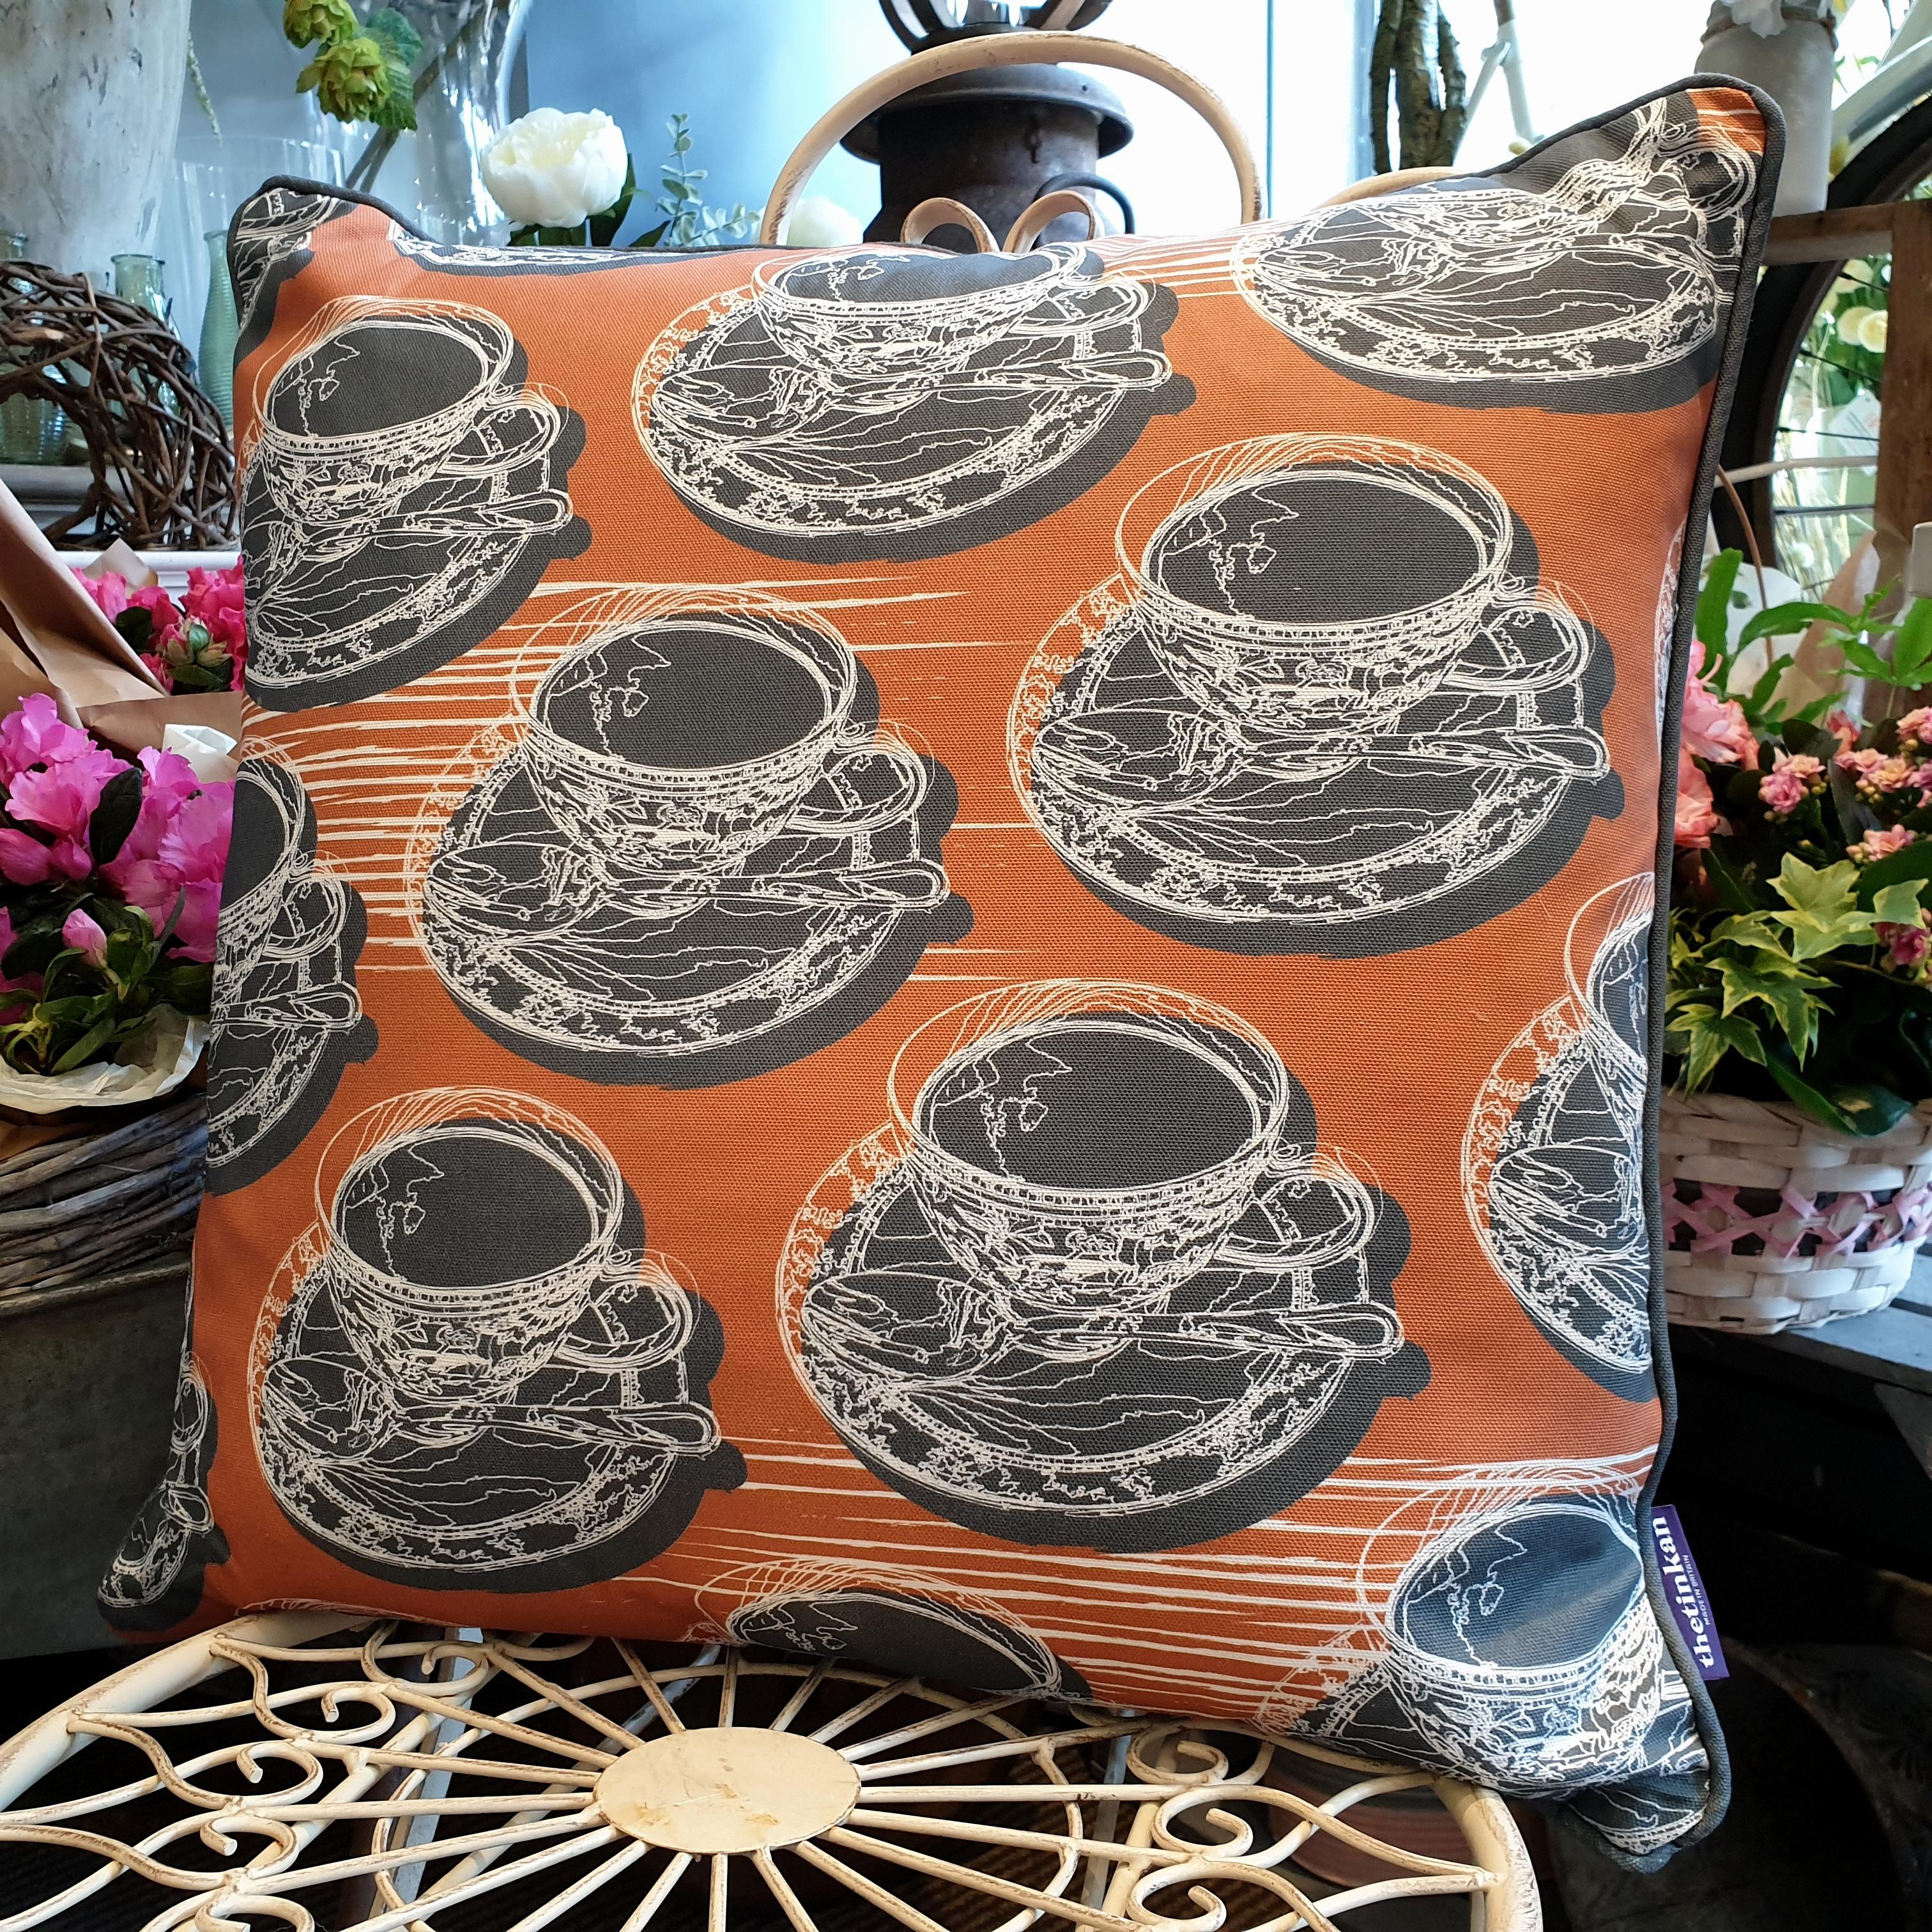 Double-sided warm rust orange 51cm square retro Afternoon Tea cushion with artistic white shards and grey handcrafted piping designed by thetinkan. White traced outline of multiple British teacups and saucers each colour filled in charcoal grey. Available with an optional luxury cushion inner pad. VIEW PRODUCT >>